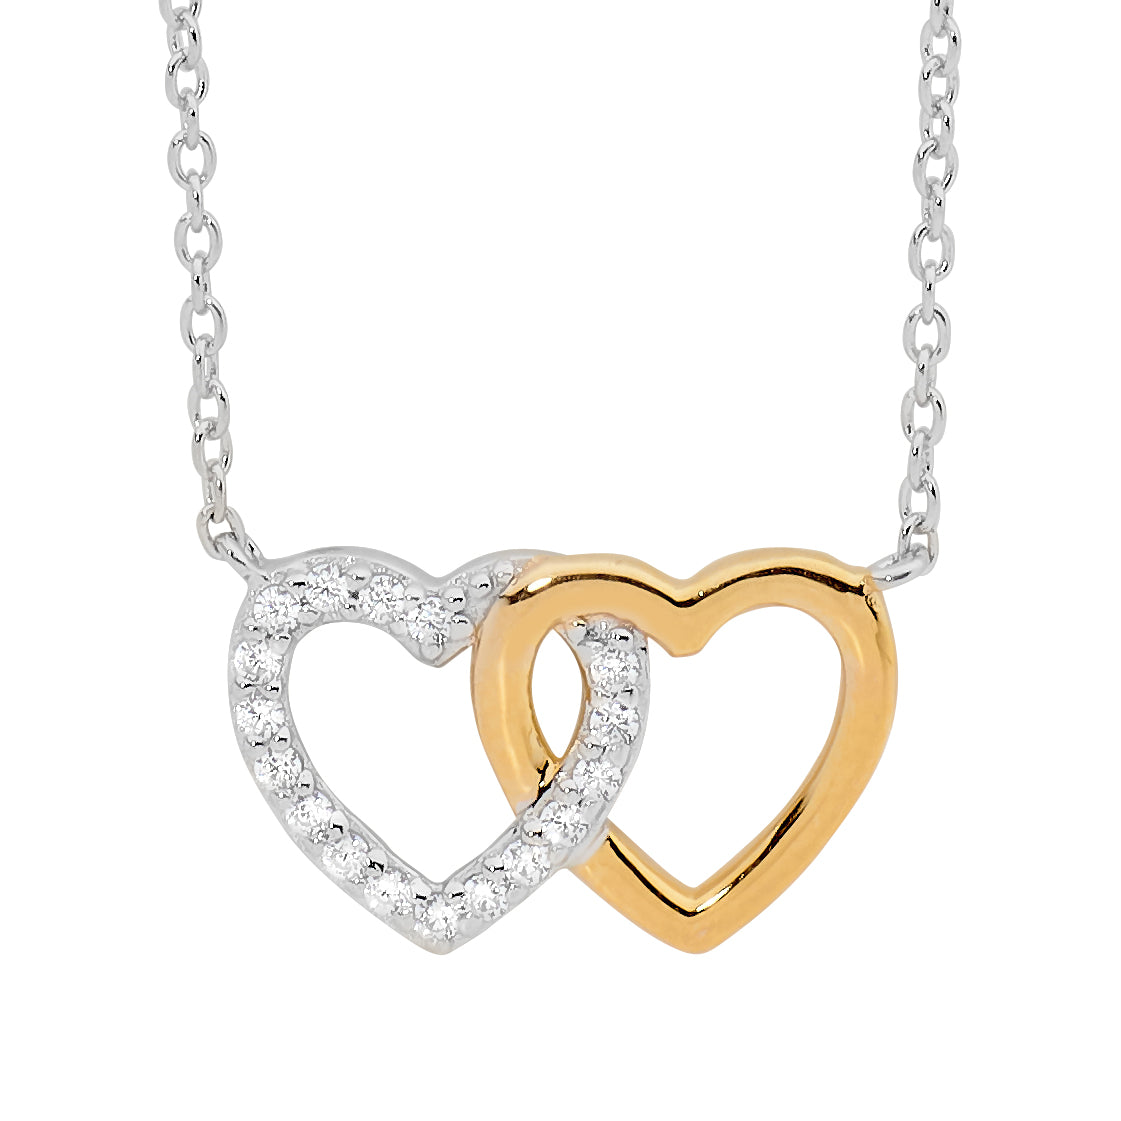 Sterling Silver & Rose Gold Plated Double Heart Necklace with Cubic Zirconia's